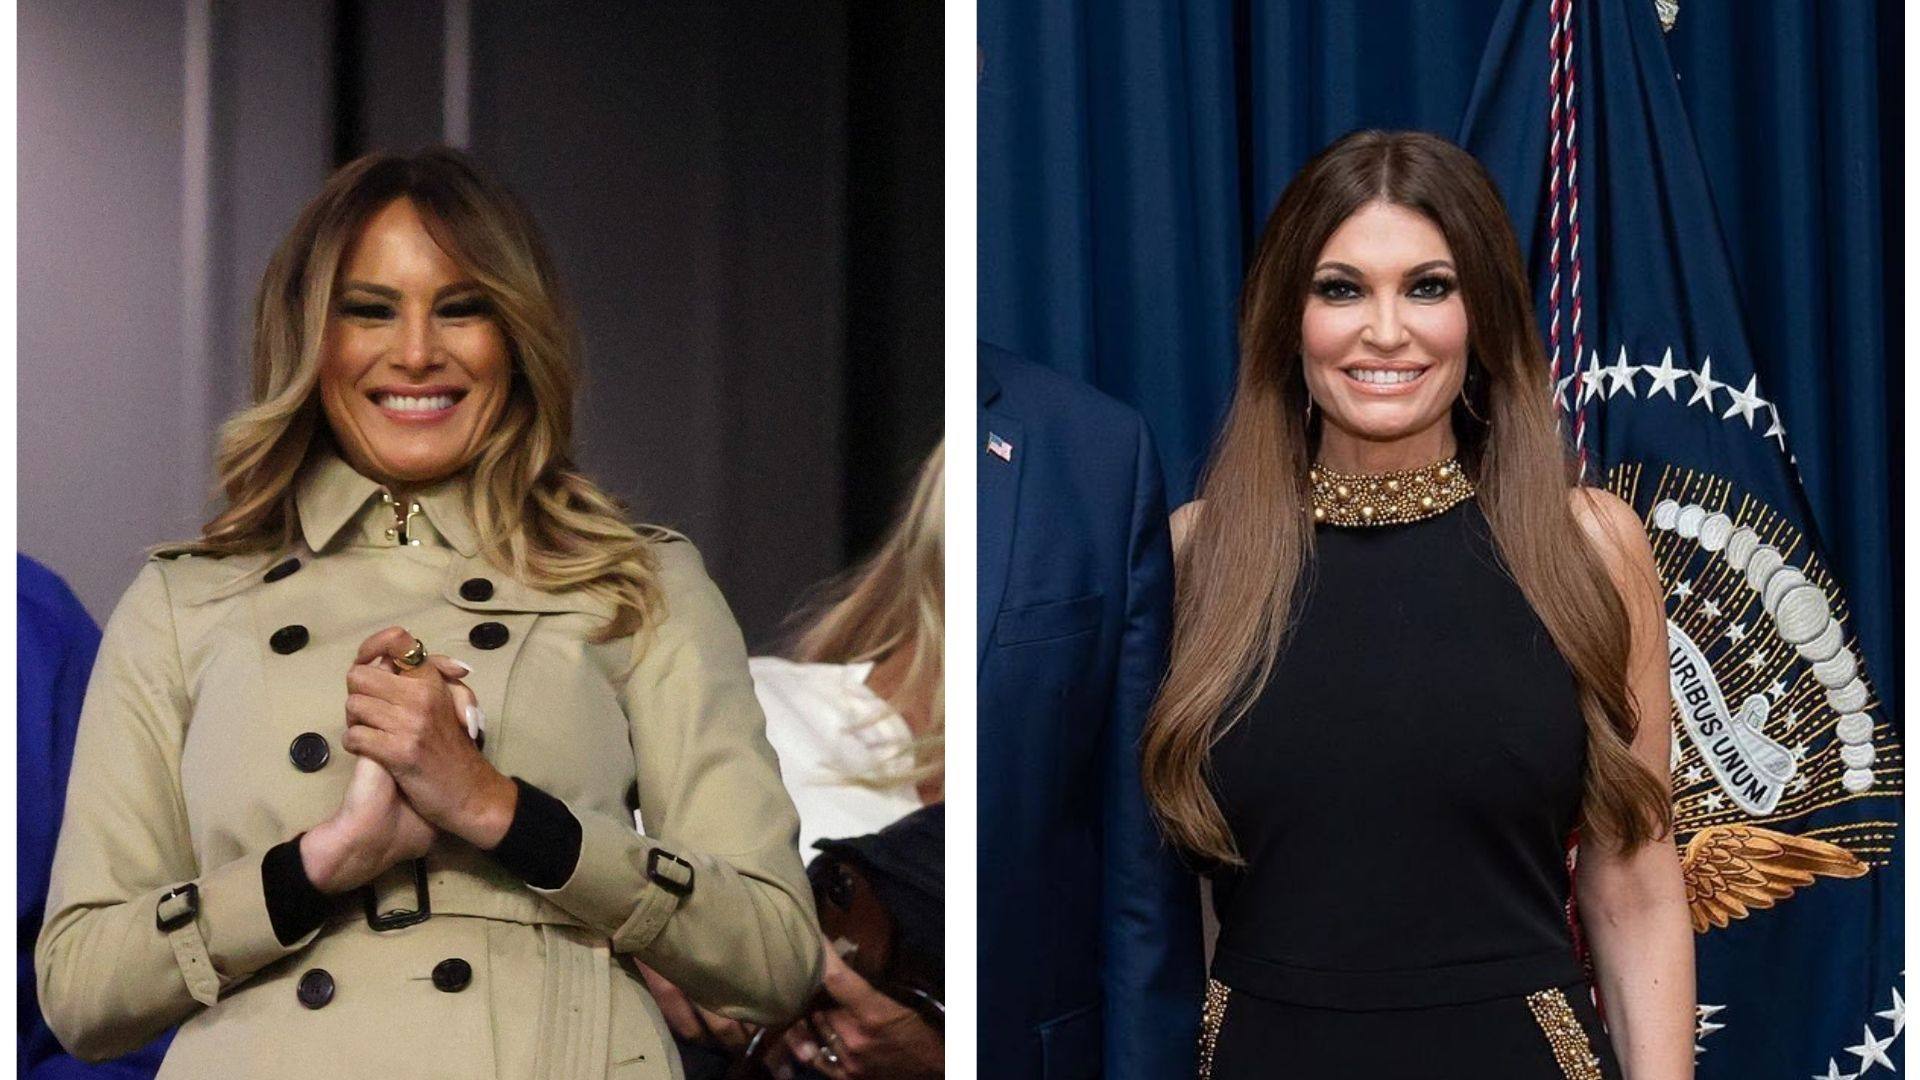 Melania Trump is in fact two years younger than Kimberly Guilfoyle, who will become part of the Trump family when she marries Donald Jr. Photos: AFP, @kimberlyguilfoyle/Instagram